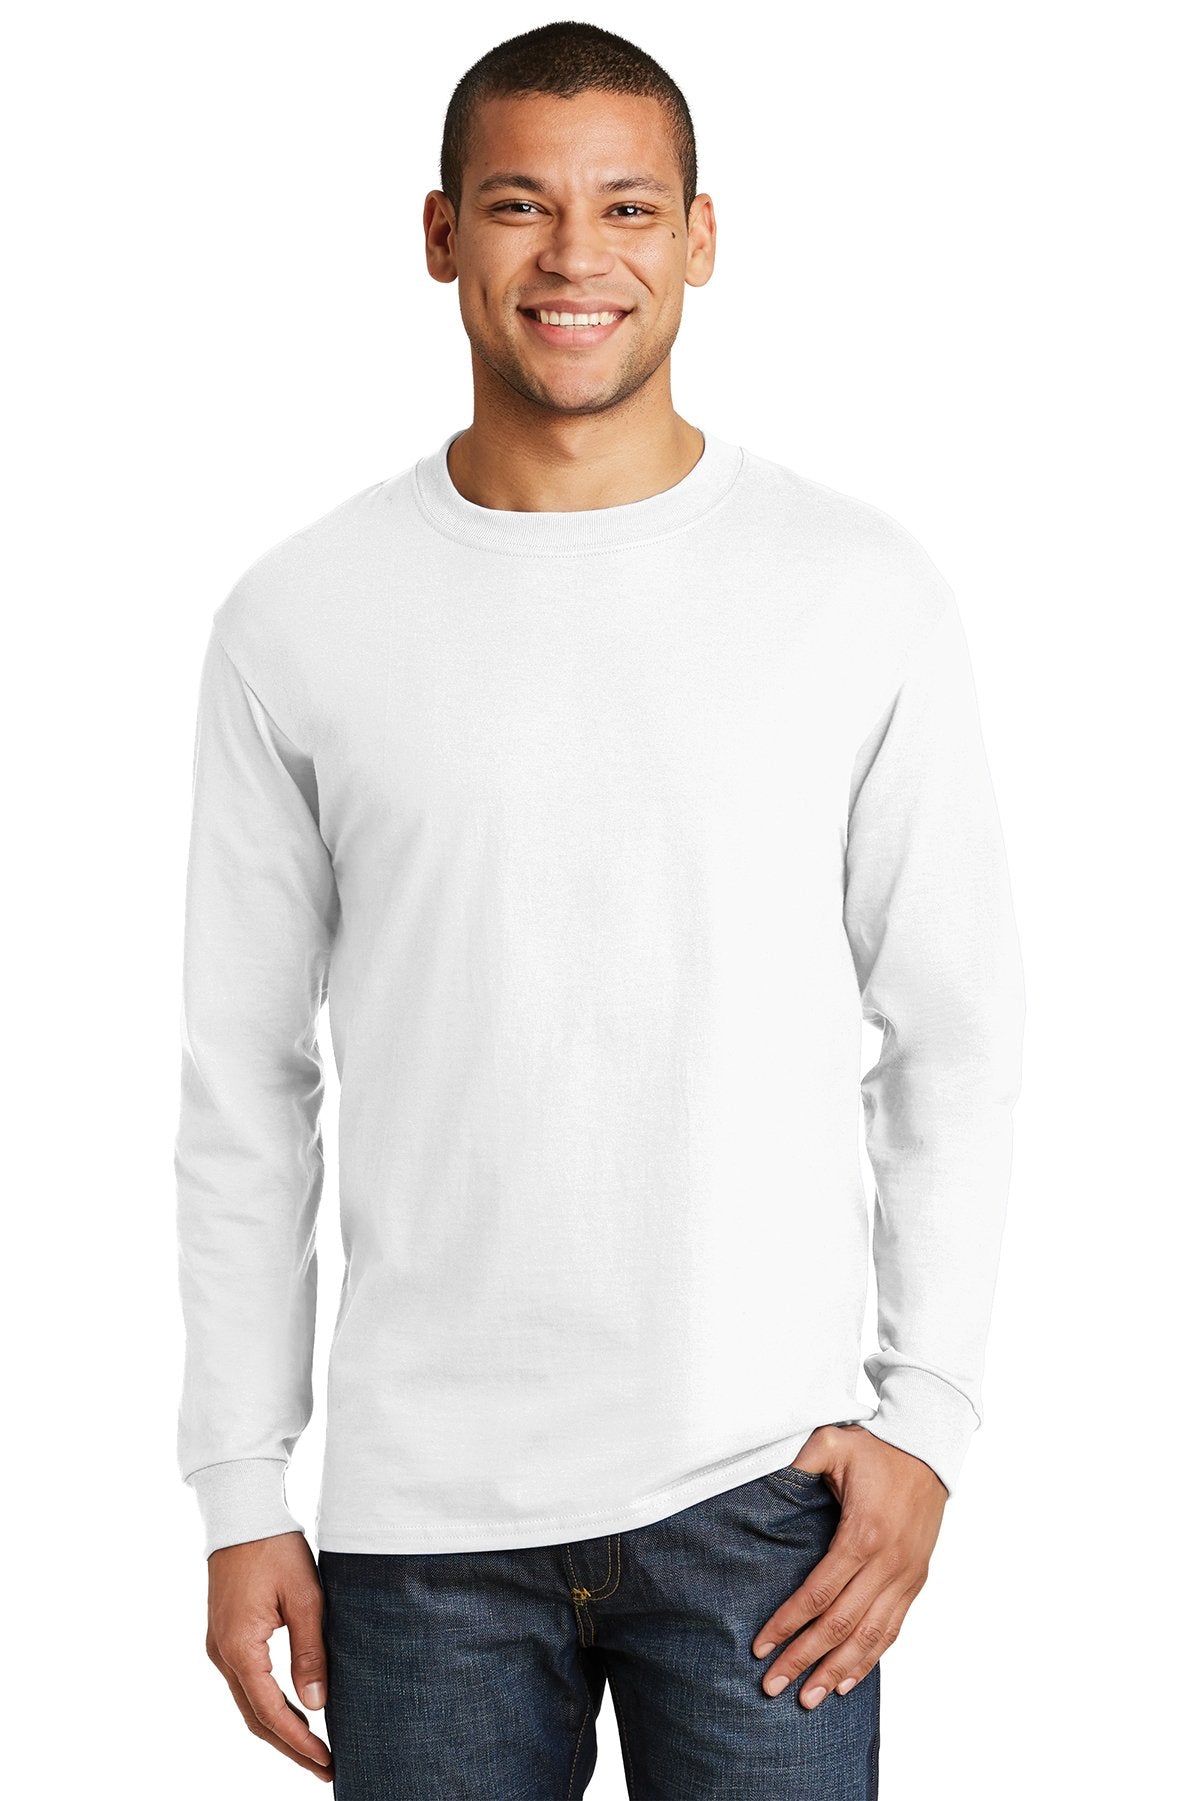 hanes beefy t cotton long sleeve t shirt 5186 white